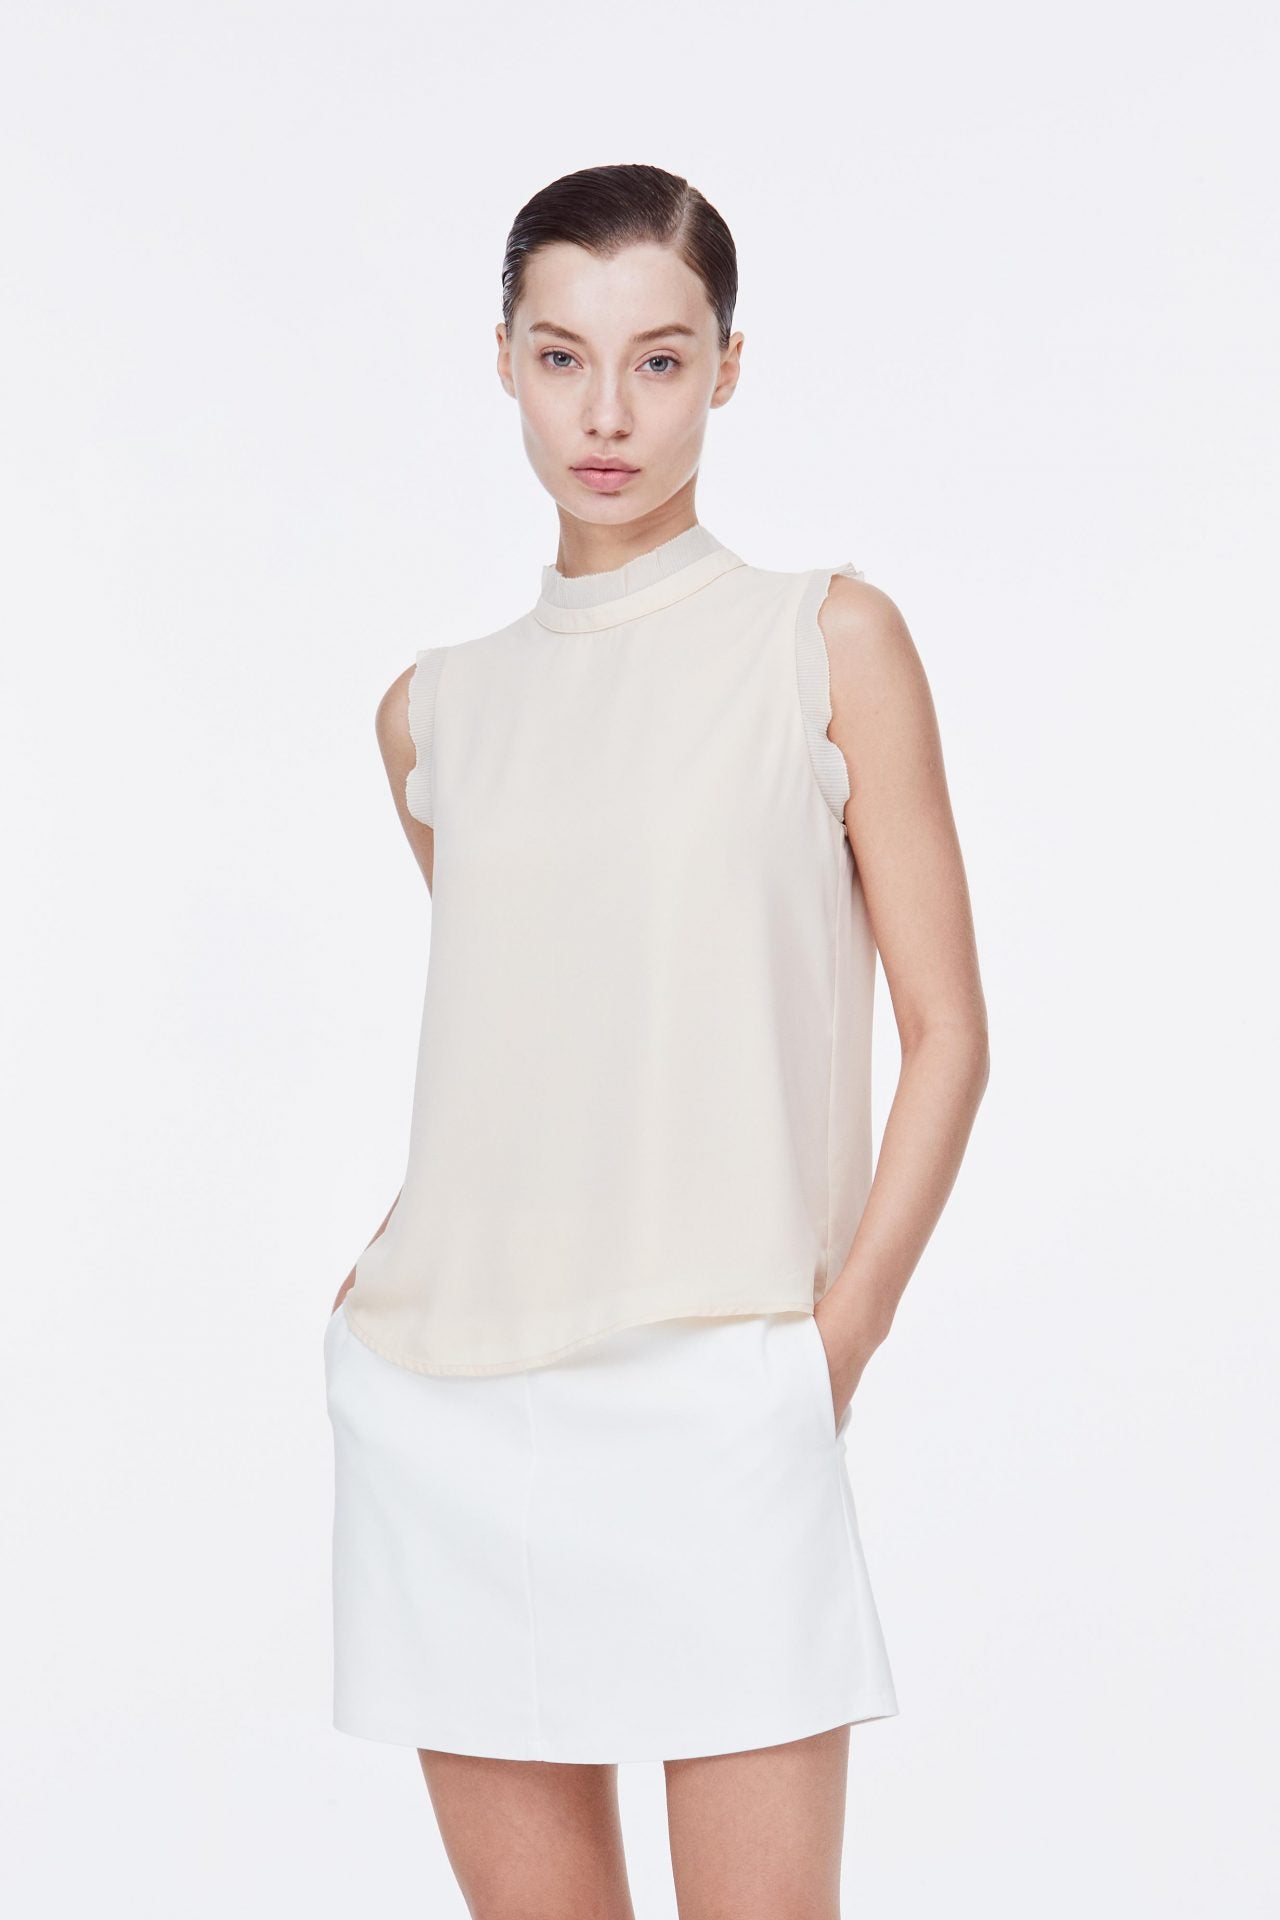 ABV 9148 SLEEVELESS TOP DAWN FRONT